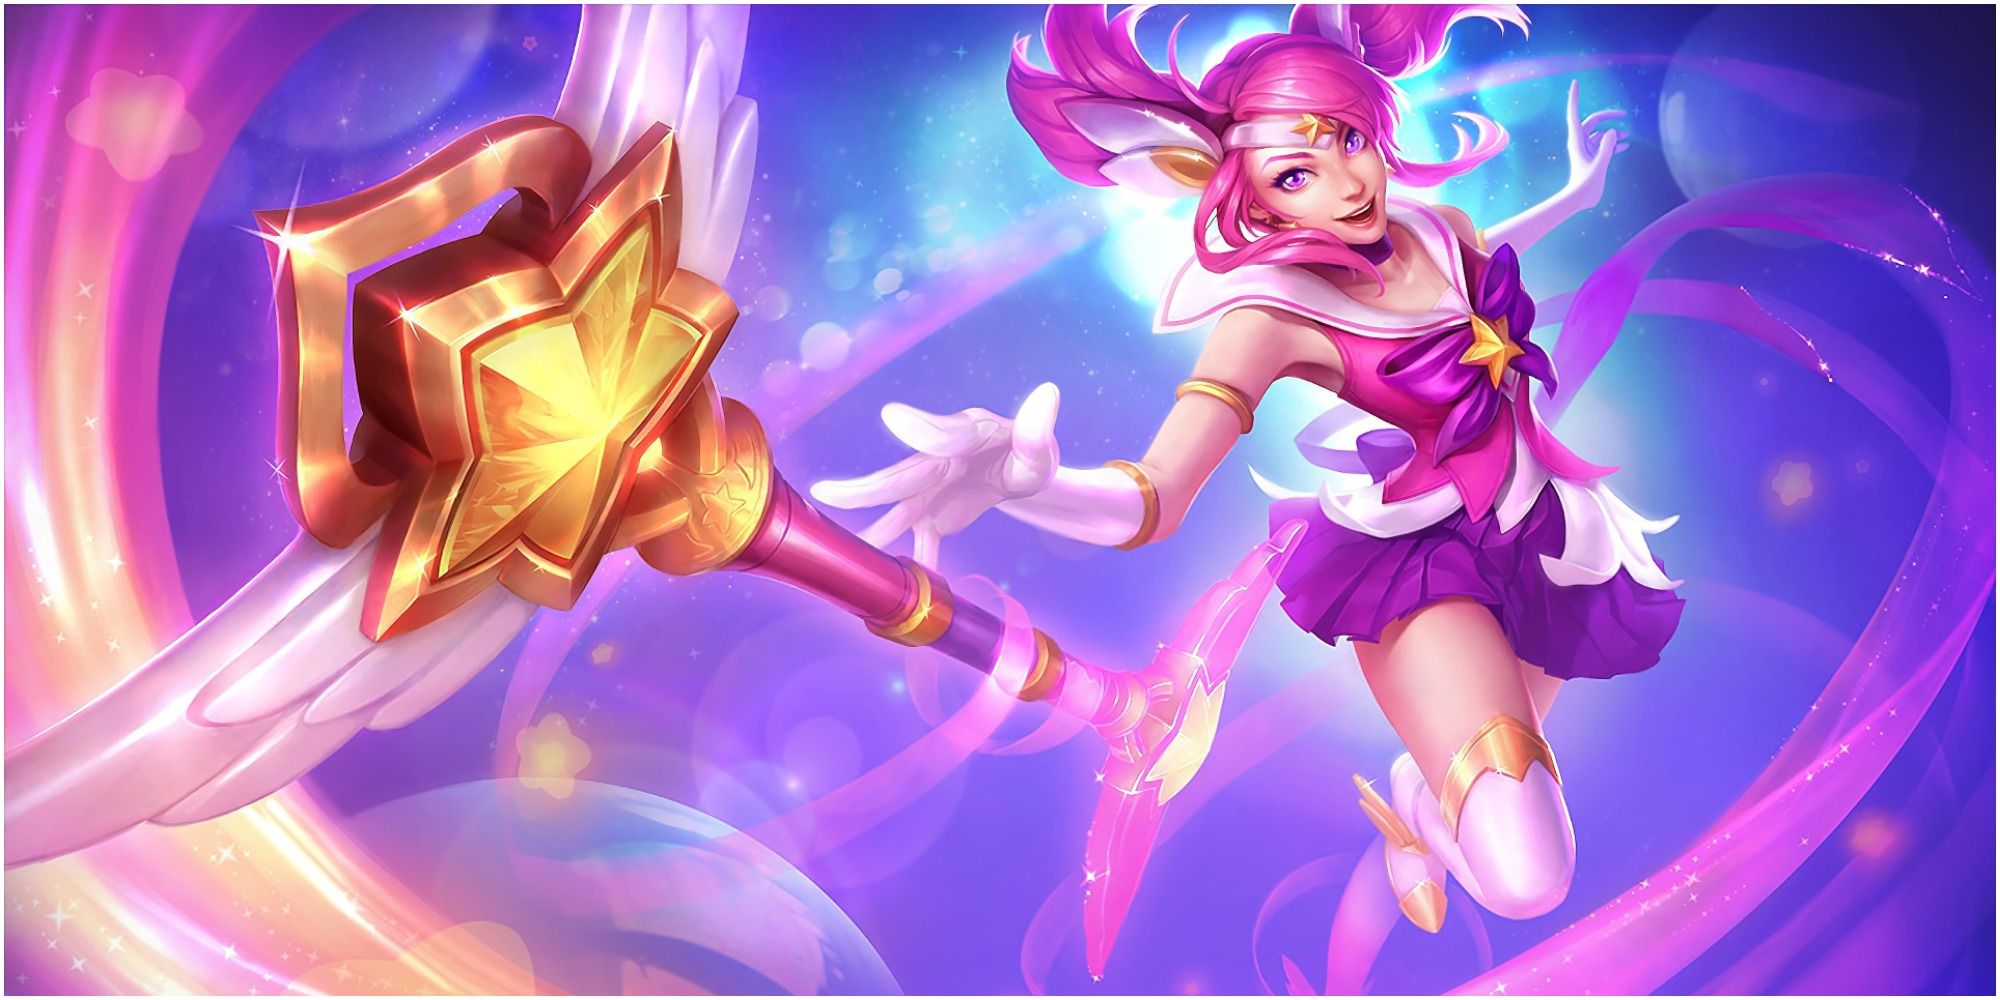 League of Legends Star Guardian Lux pink chosen by the first star wielding wand in a magical girl sailor uniform sparkle